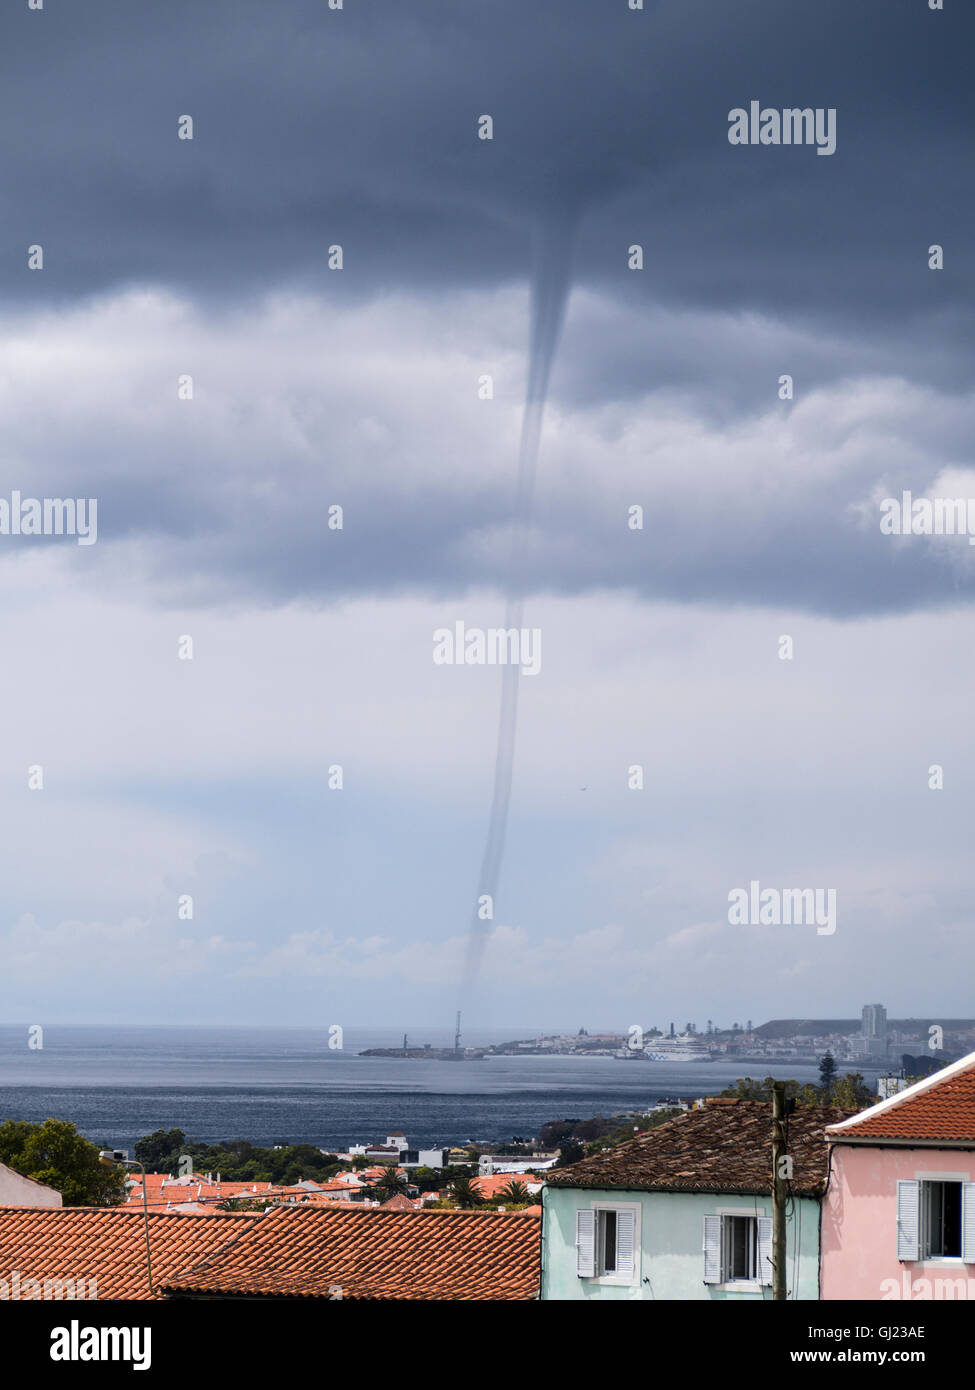 Waterspout over Ponta Delgada. A tornadic waterspout appears from the dark storm clouds in the ocean just beyond the city centre Stock Photo